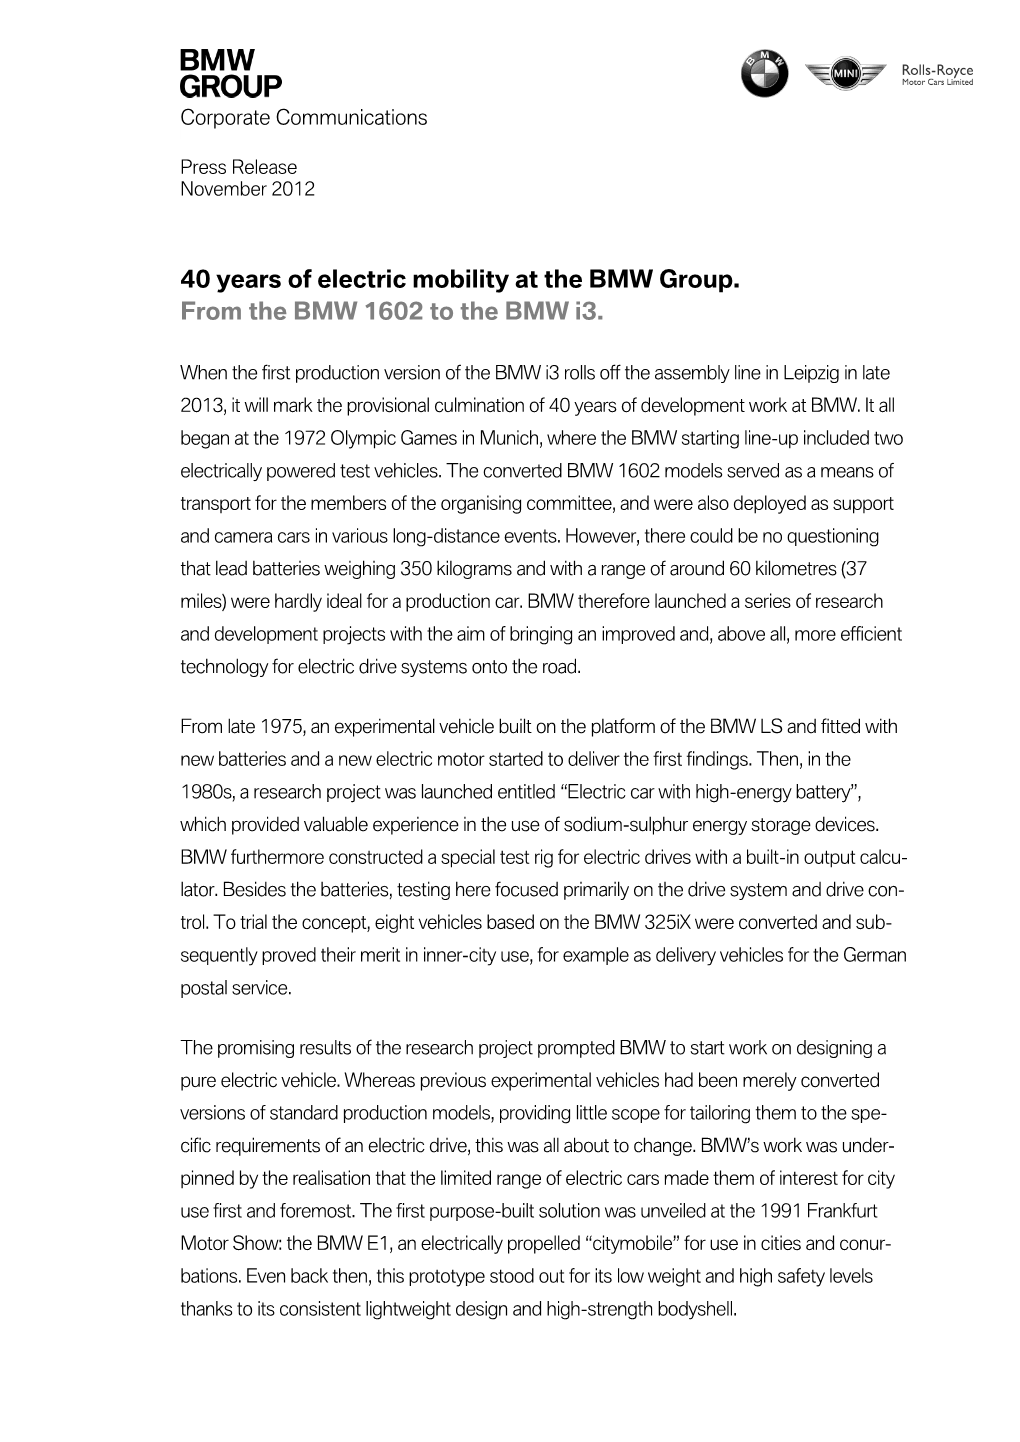 40 Years of Electric Mobility at the BMW Group. from the BMW 1602 to the BMW I3